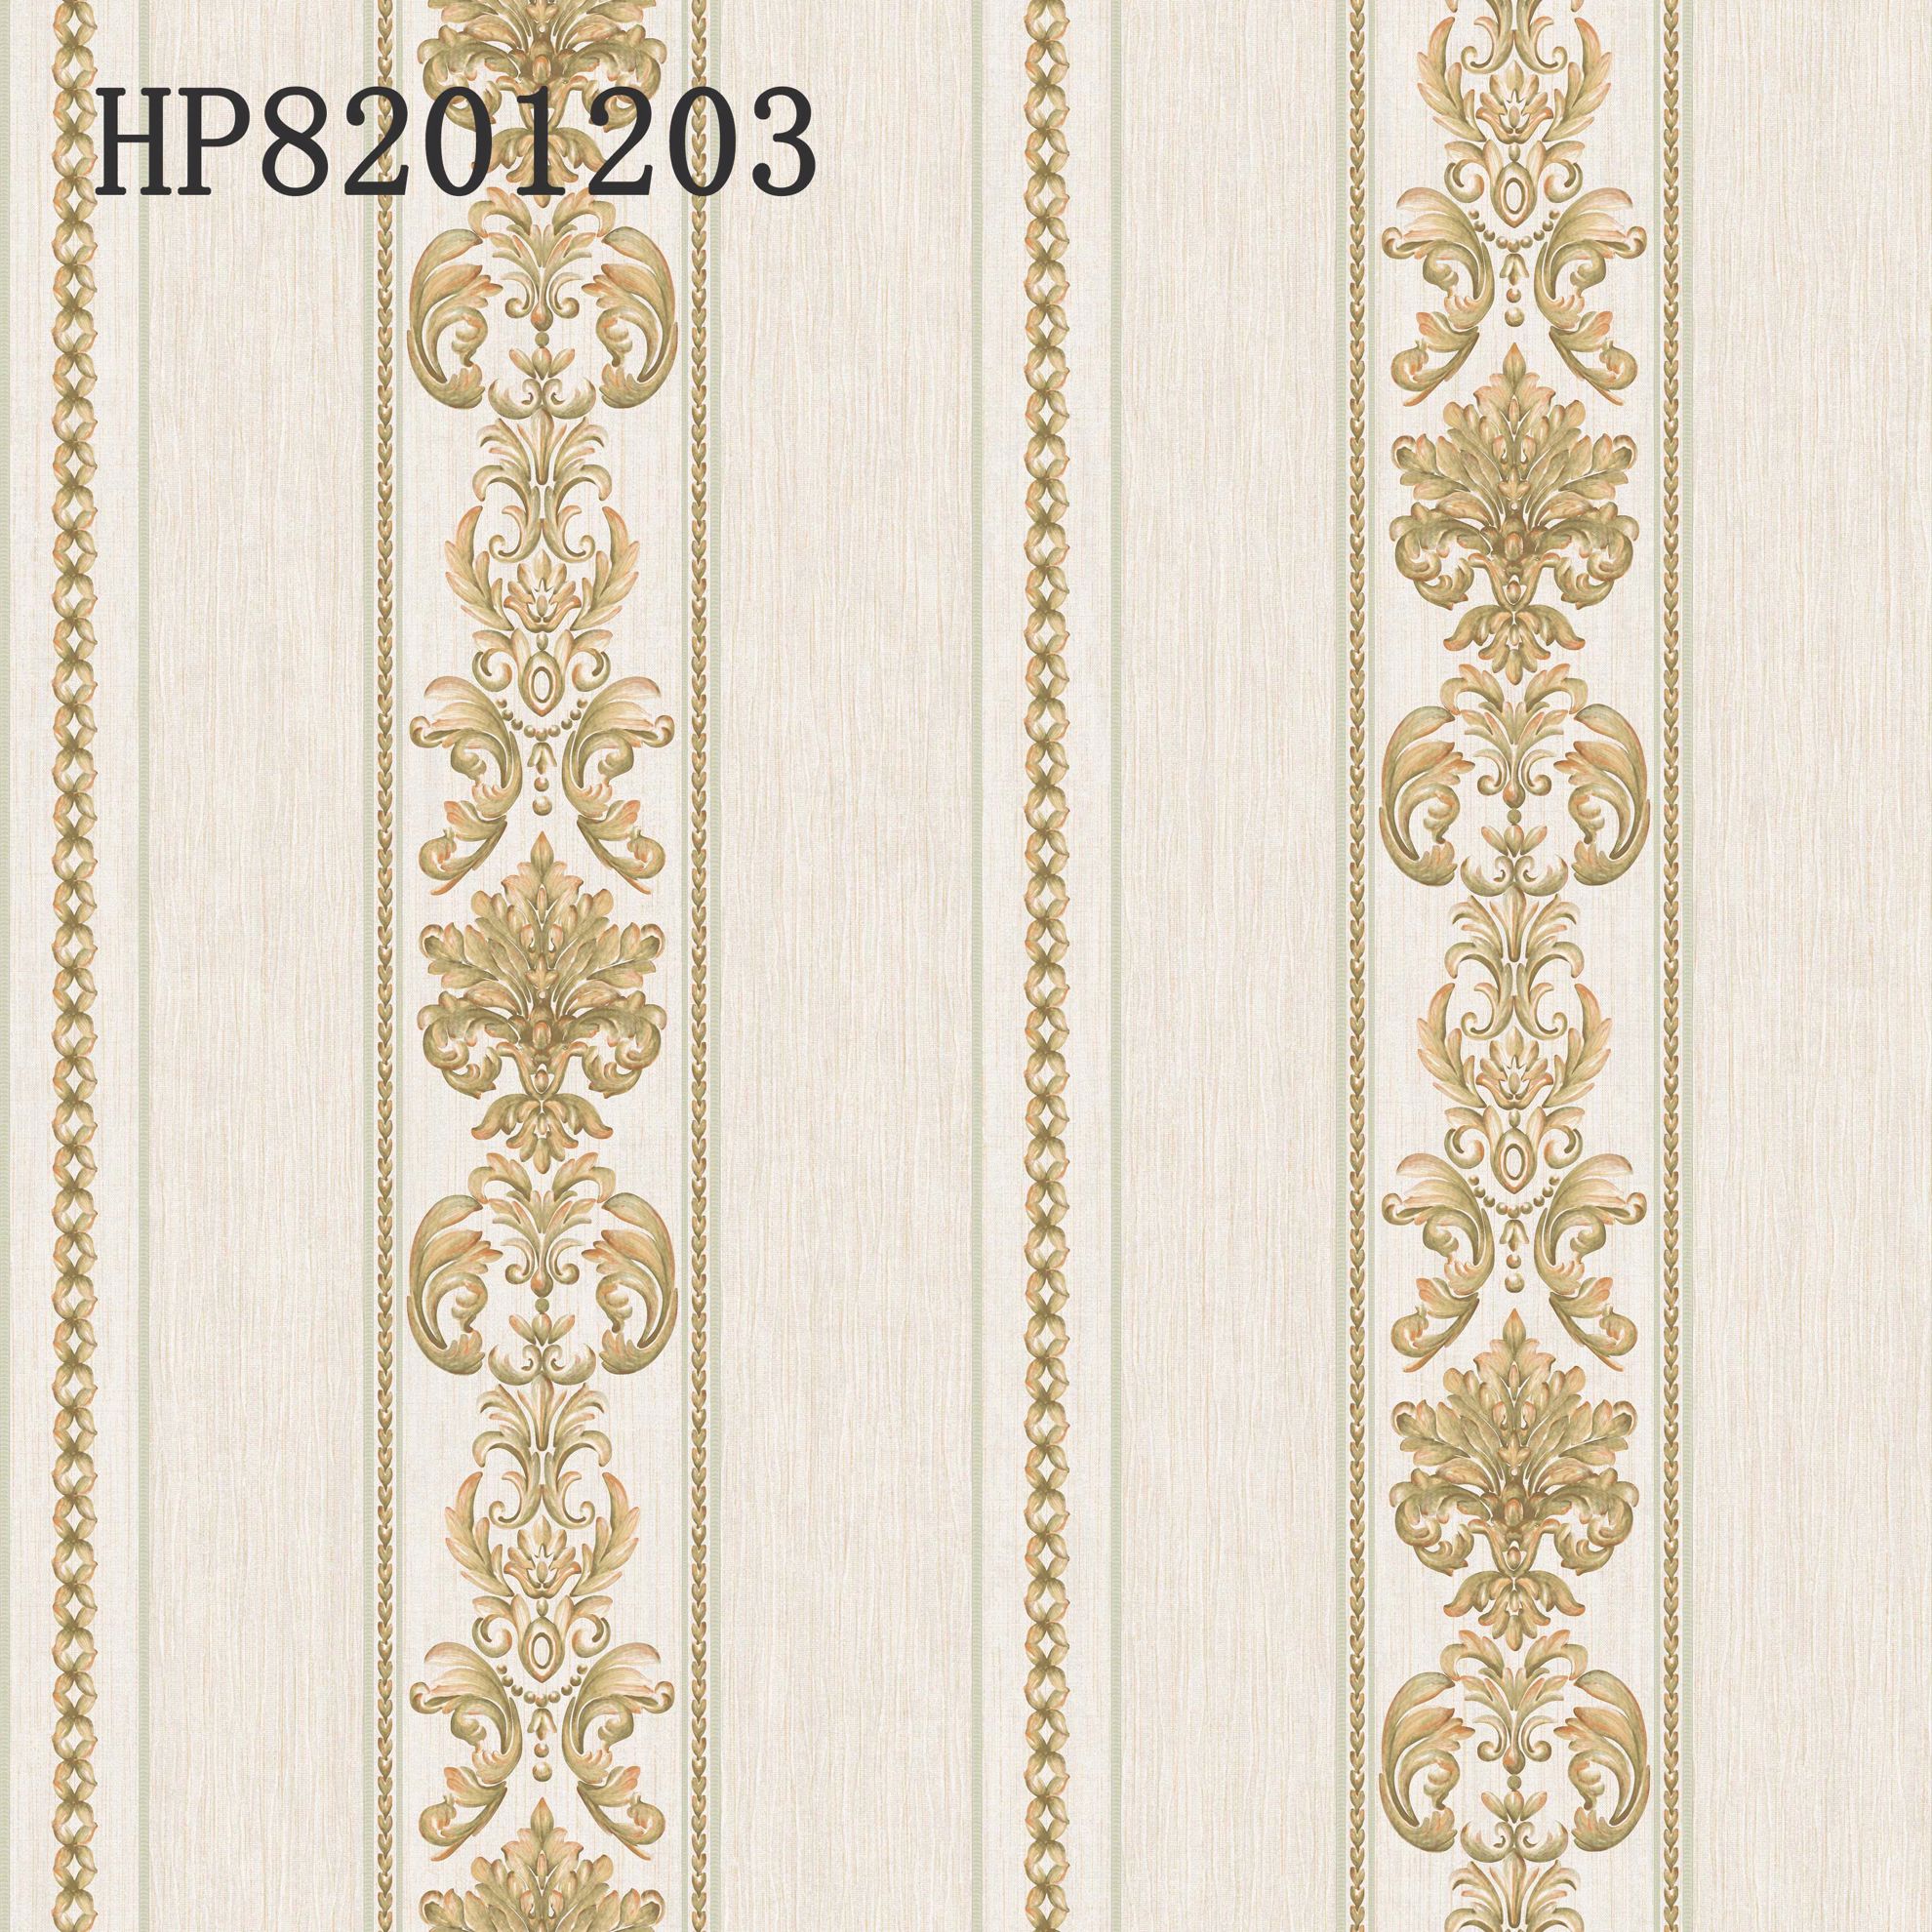 3d Wallpaper For Home Decoration HP82001203